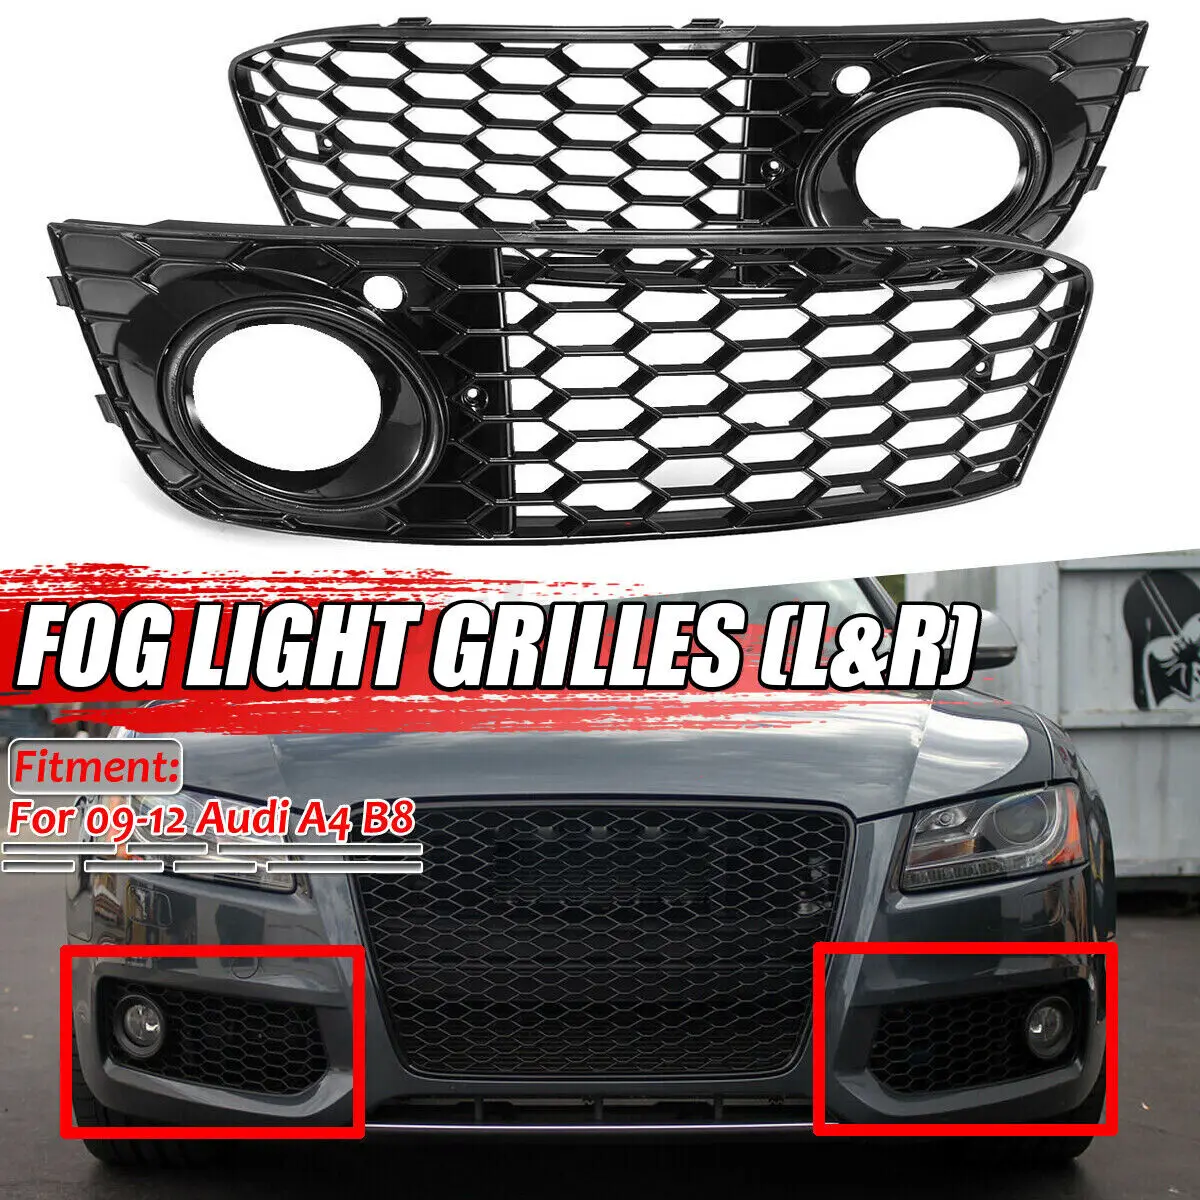 

Front Bumper Grille Cover Car Styling Honeycomb Mesh Fog Light Grill For Audi A4 B8 2009 2010 2011 2012 8KD807682 8KD807681